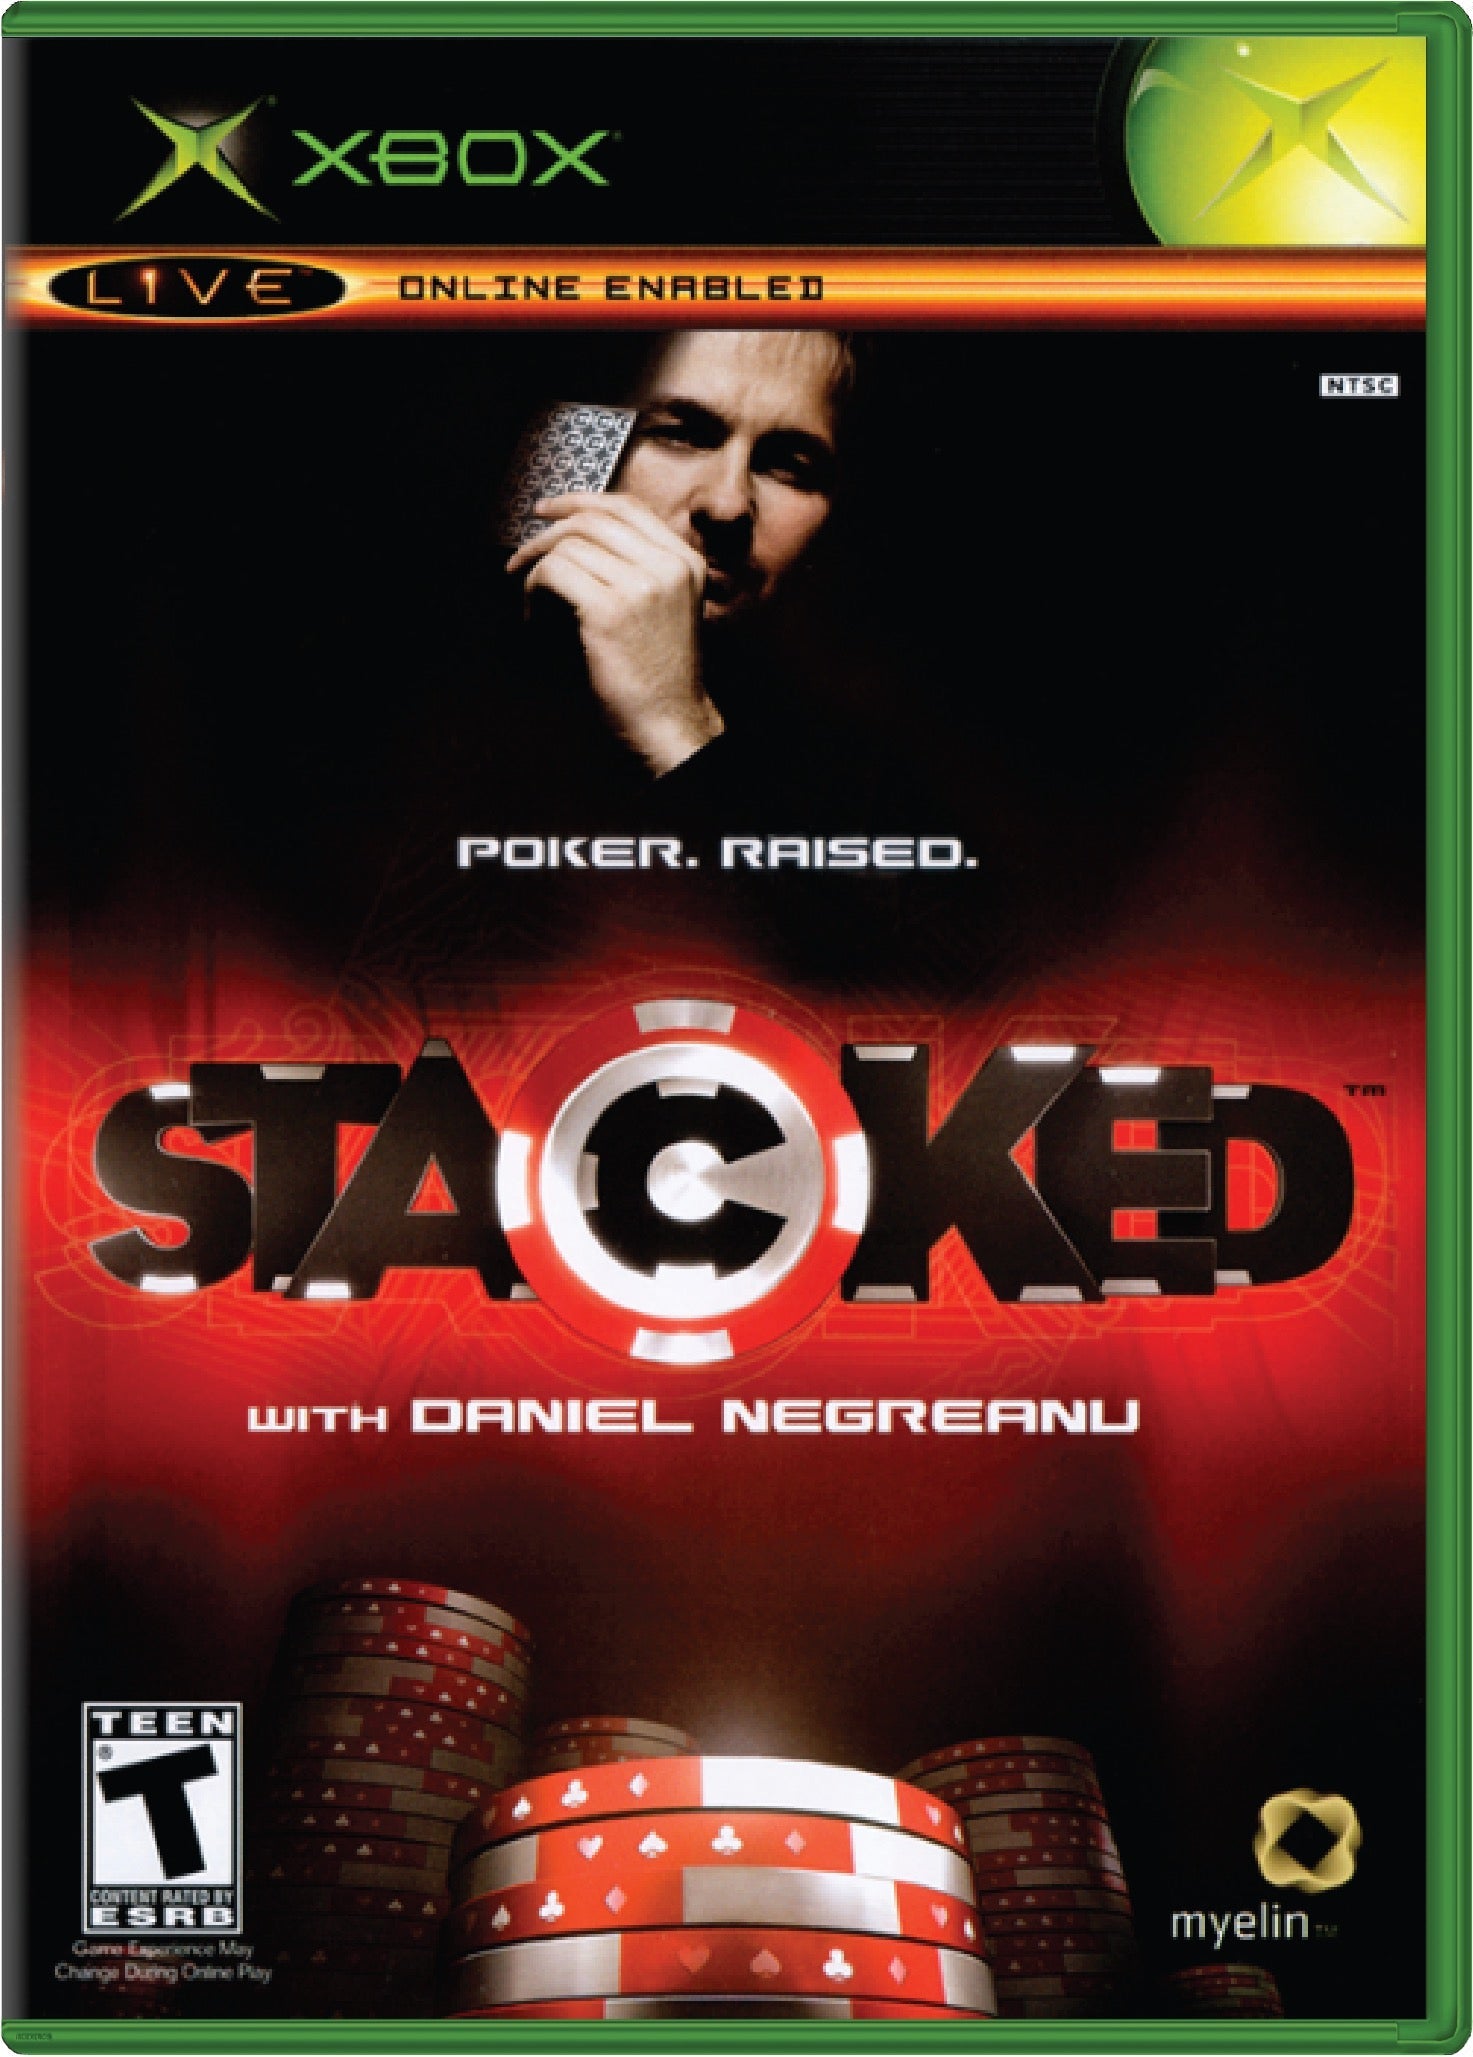 Stacked With Daniel Negreanu Cover Art